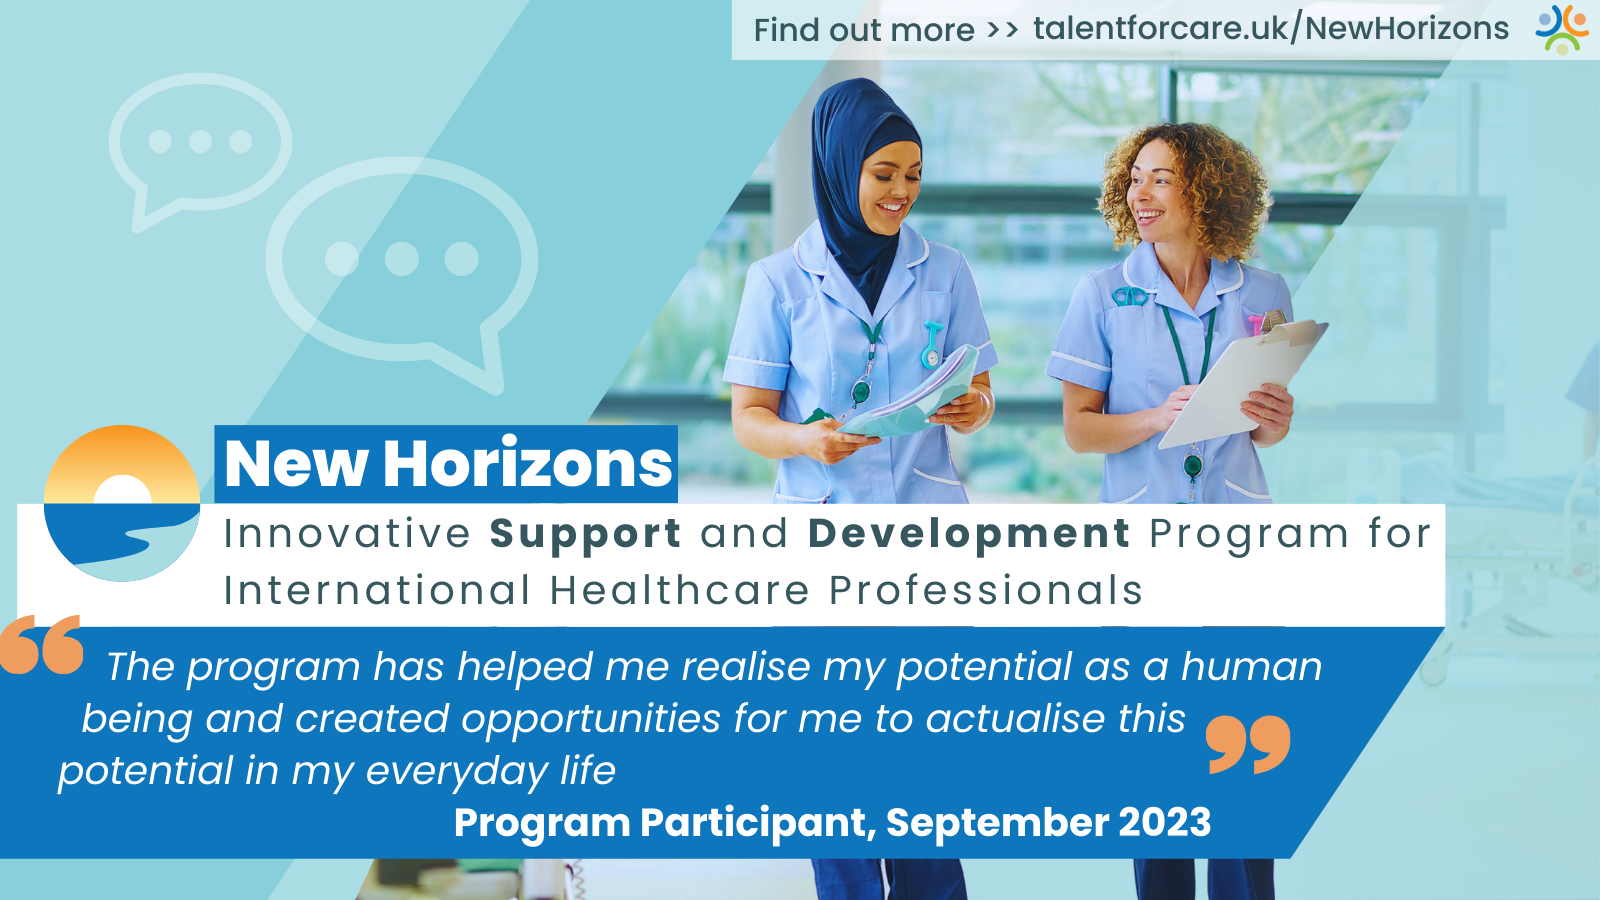 New Horizons, innovative support and development program for international healthcare professionals. "the program has helped me realise my potential as a human being and created opportunities for me to actualise this potential in my everyday life" program participant, September 2023